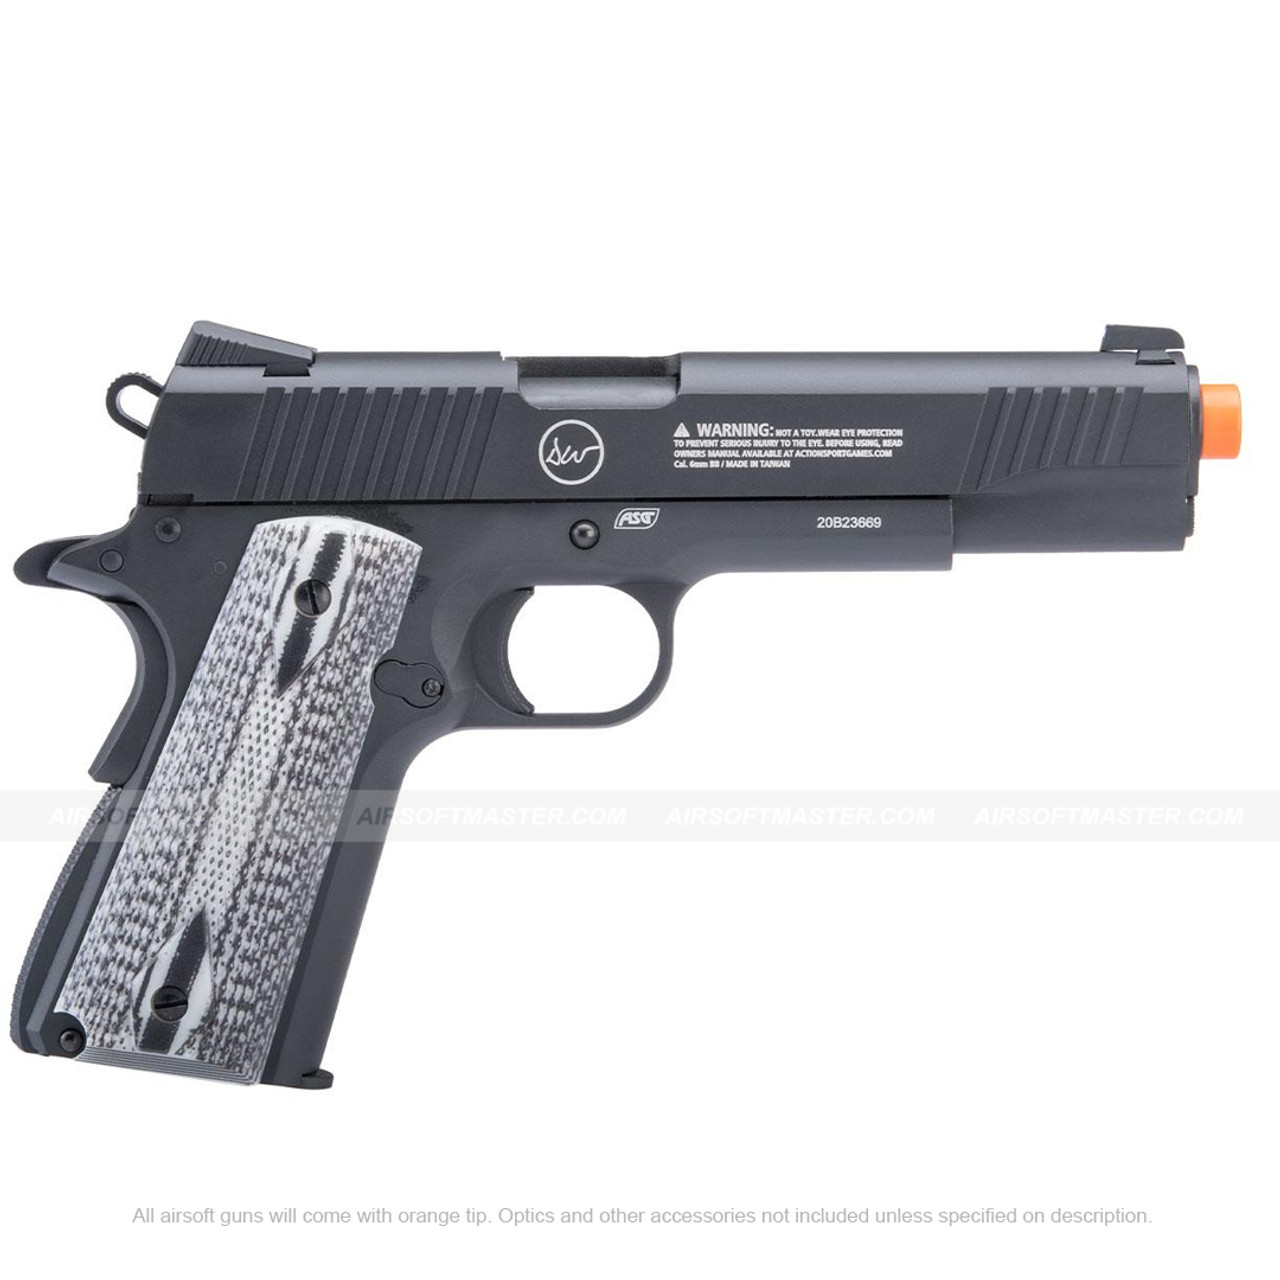 https://cdn11.bigcommerce.com/s-78737/images/stencil/1280x1280/products/5500/7179/Dan-Wesson-Licensed-Full-Metal-1911-Valor-Custom-CO2-Powered-Airsoft-Gas-Blowback-Pistol-Black-2__81392.1684187375.jpg?c=2?imbypass=on